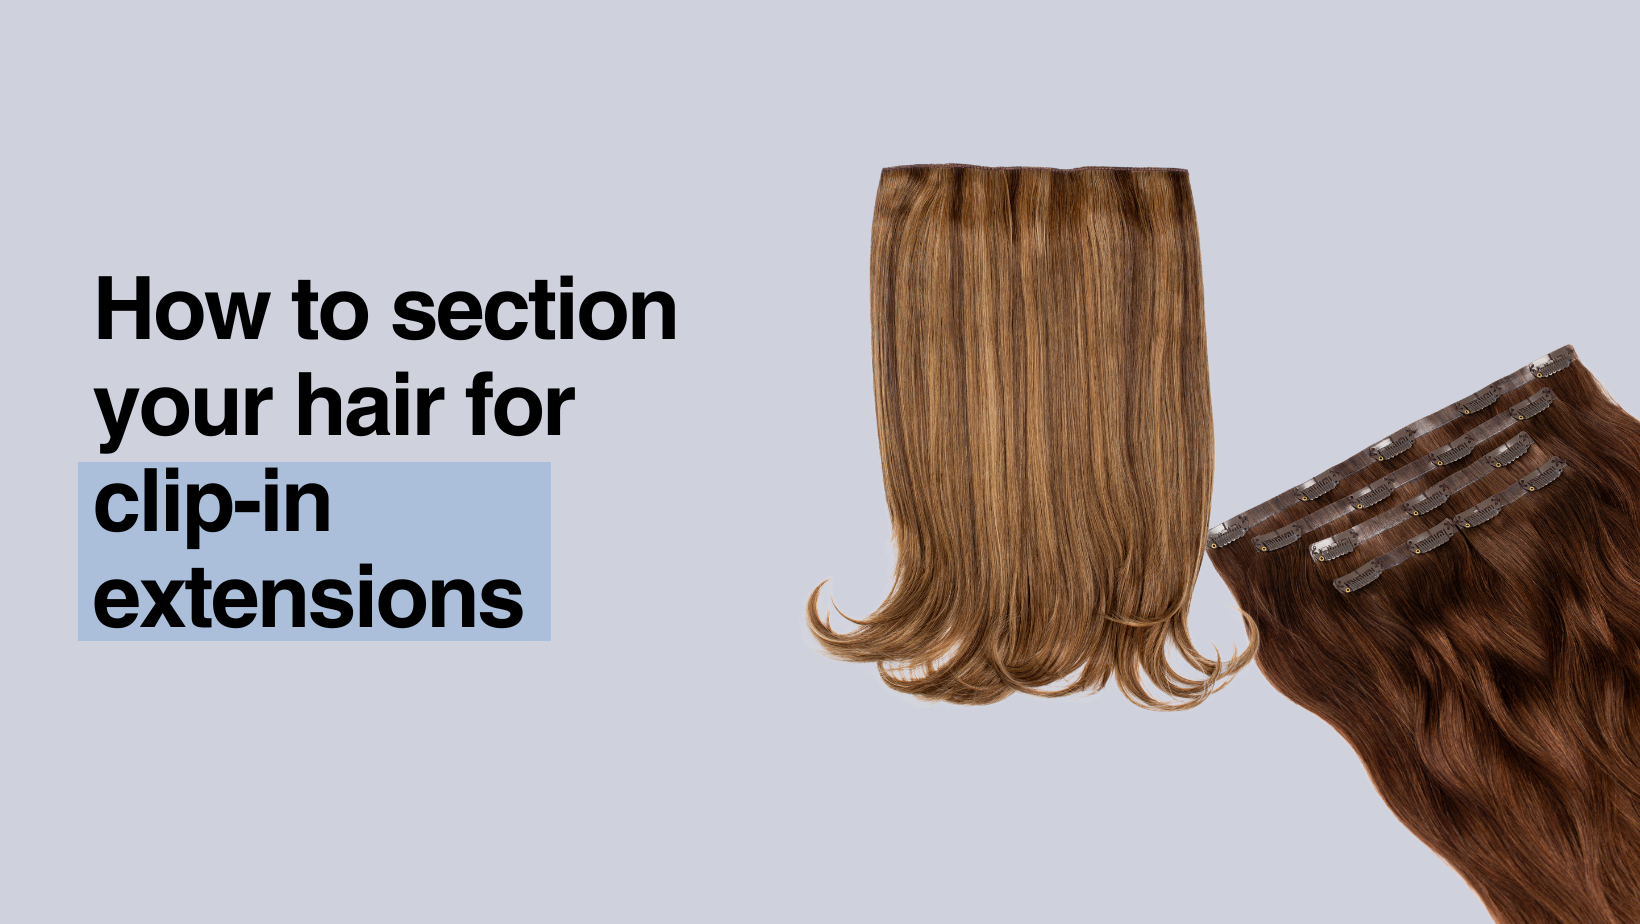 How To Section Your Hair For Clip-In Extensions